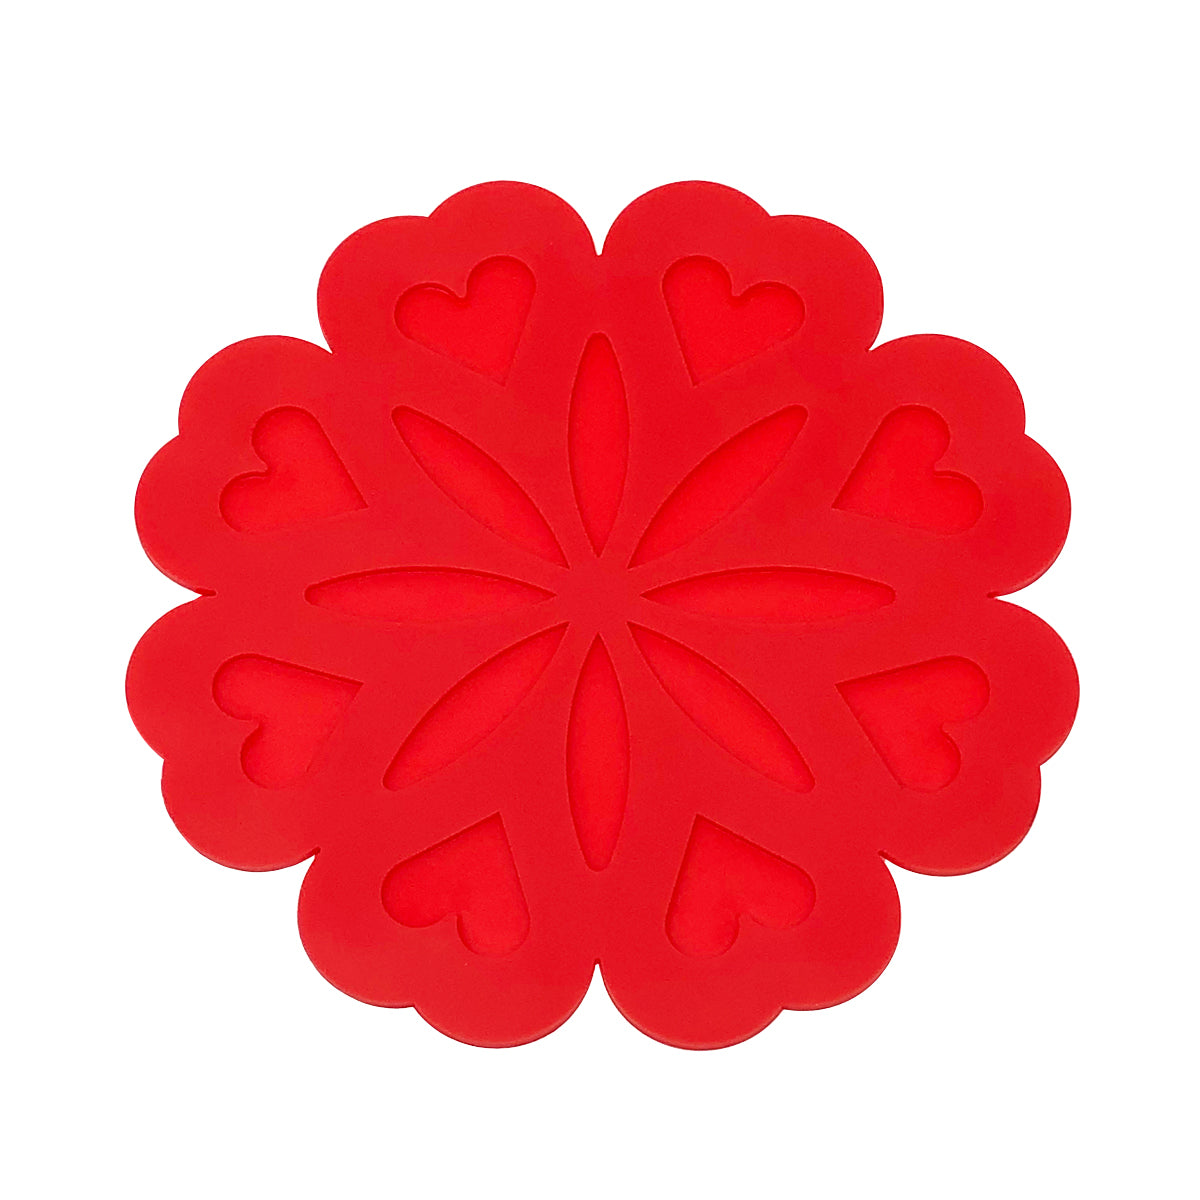 Silicone Pot Holder Trivets - Non Slip Heat Resistant Trivet Silicone Potholder Can Be used for Jar Opener, Spoon Holder, Oven Mitts, Placemats, Pot